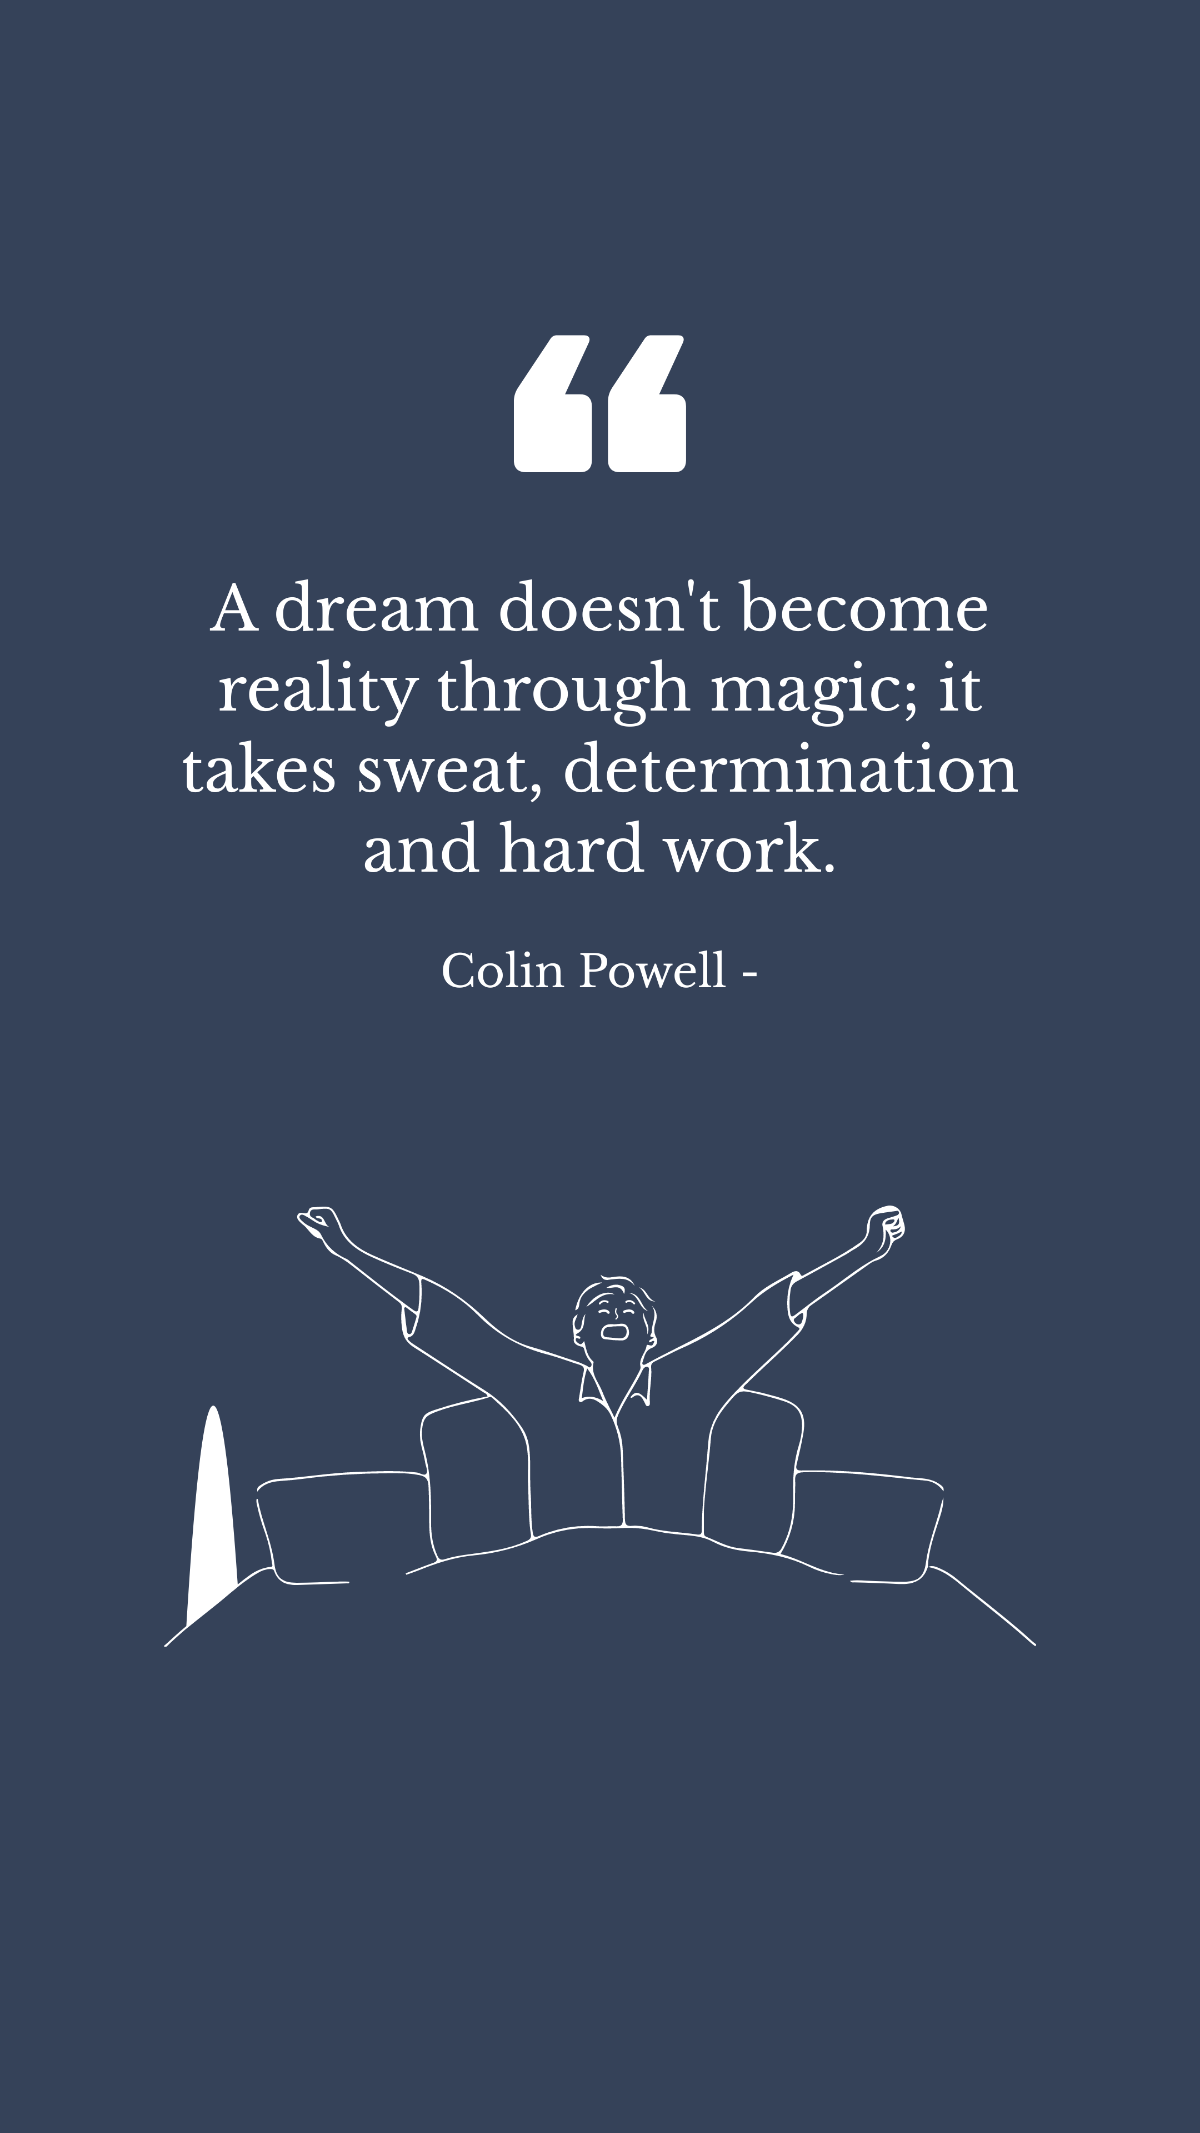 Colin Powell - A dream doesn't become reality through magic; it takes sweat, determination and hard work. Template